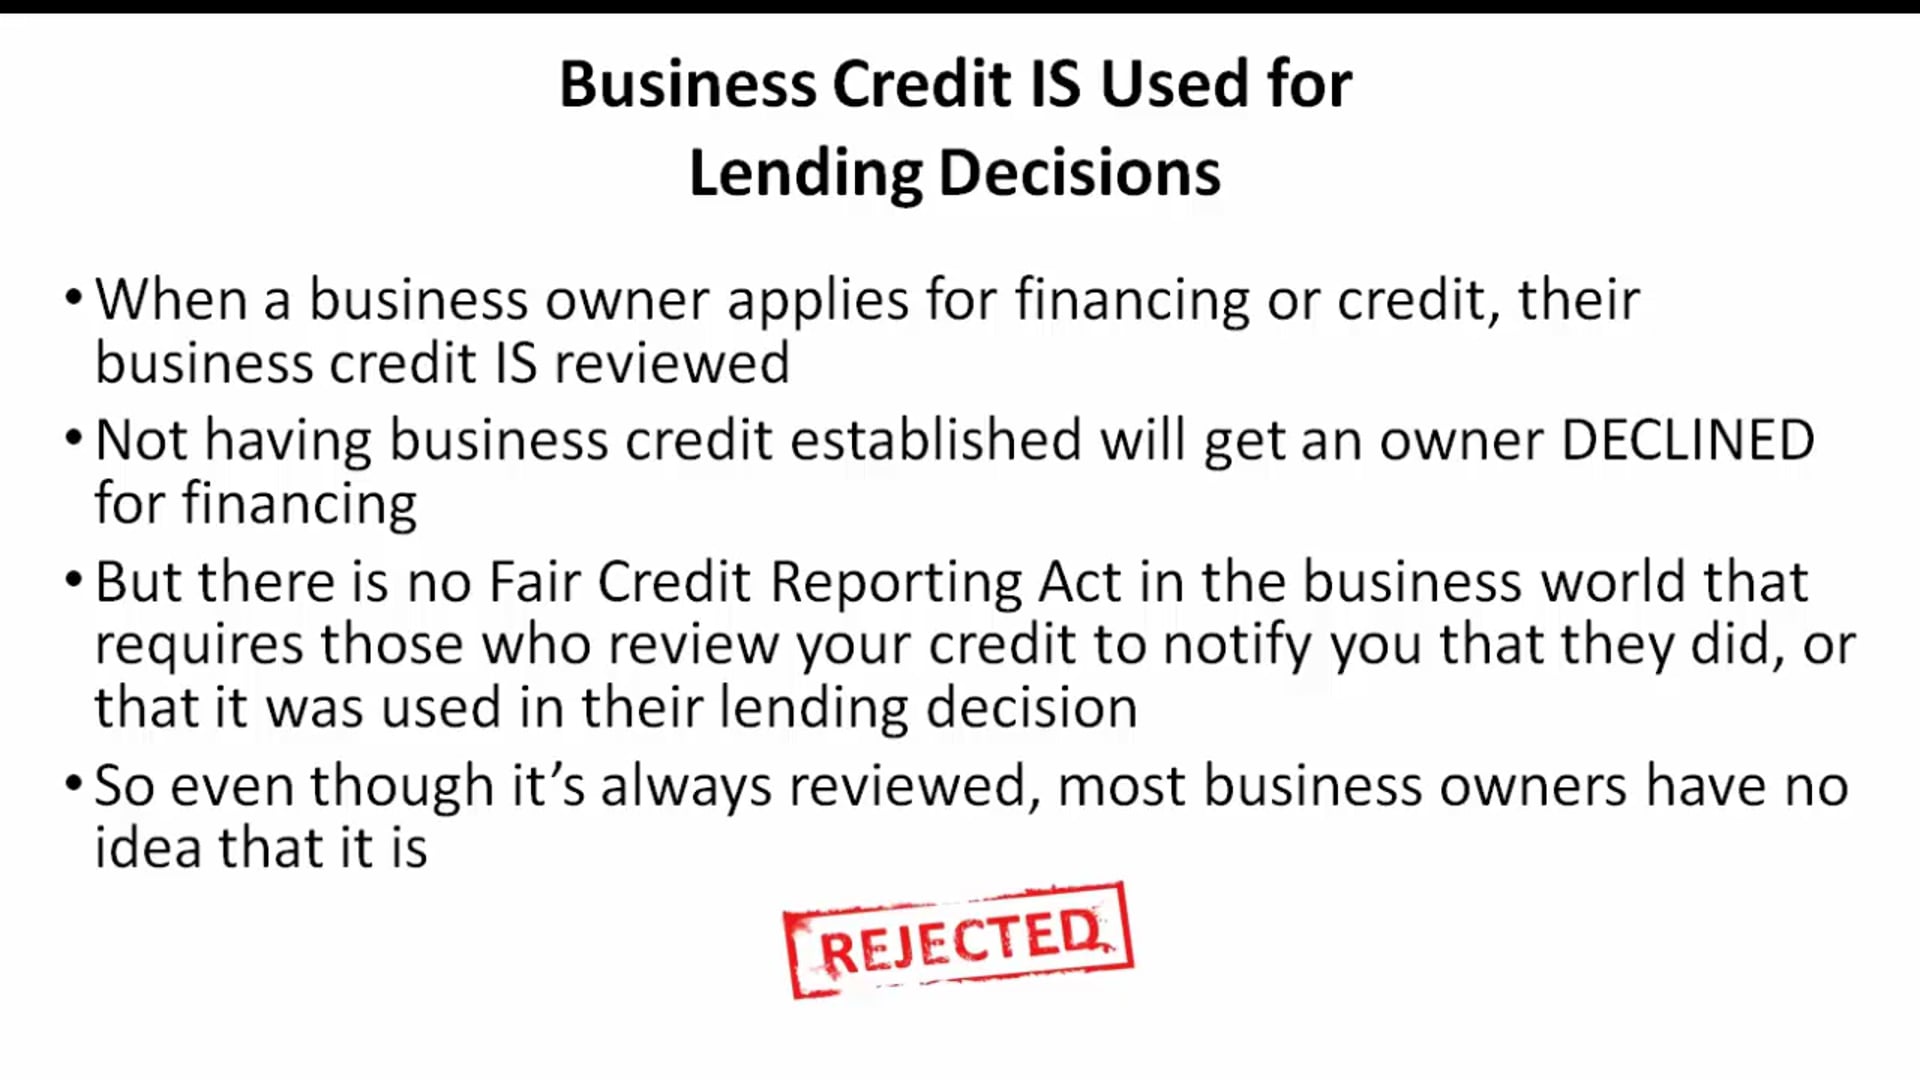 Business Credit is Used for Lending Decisions